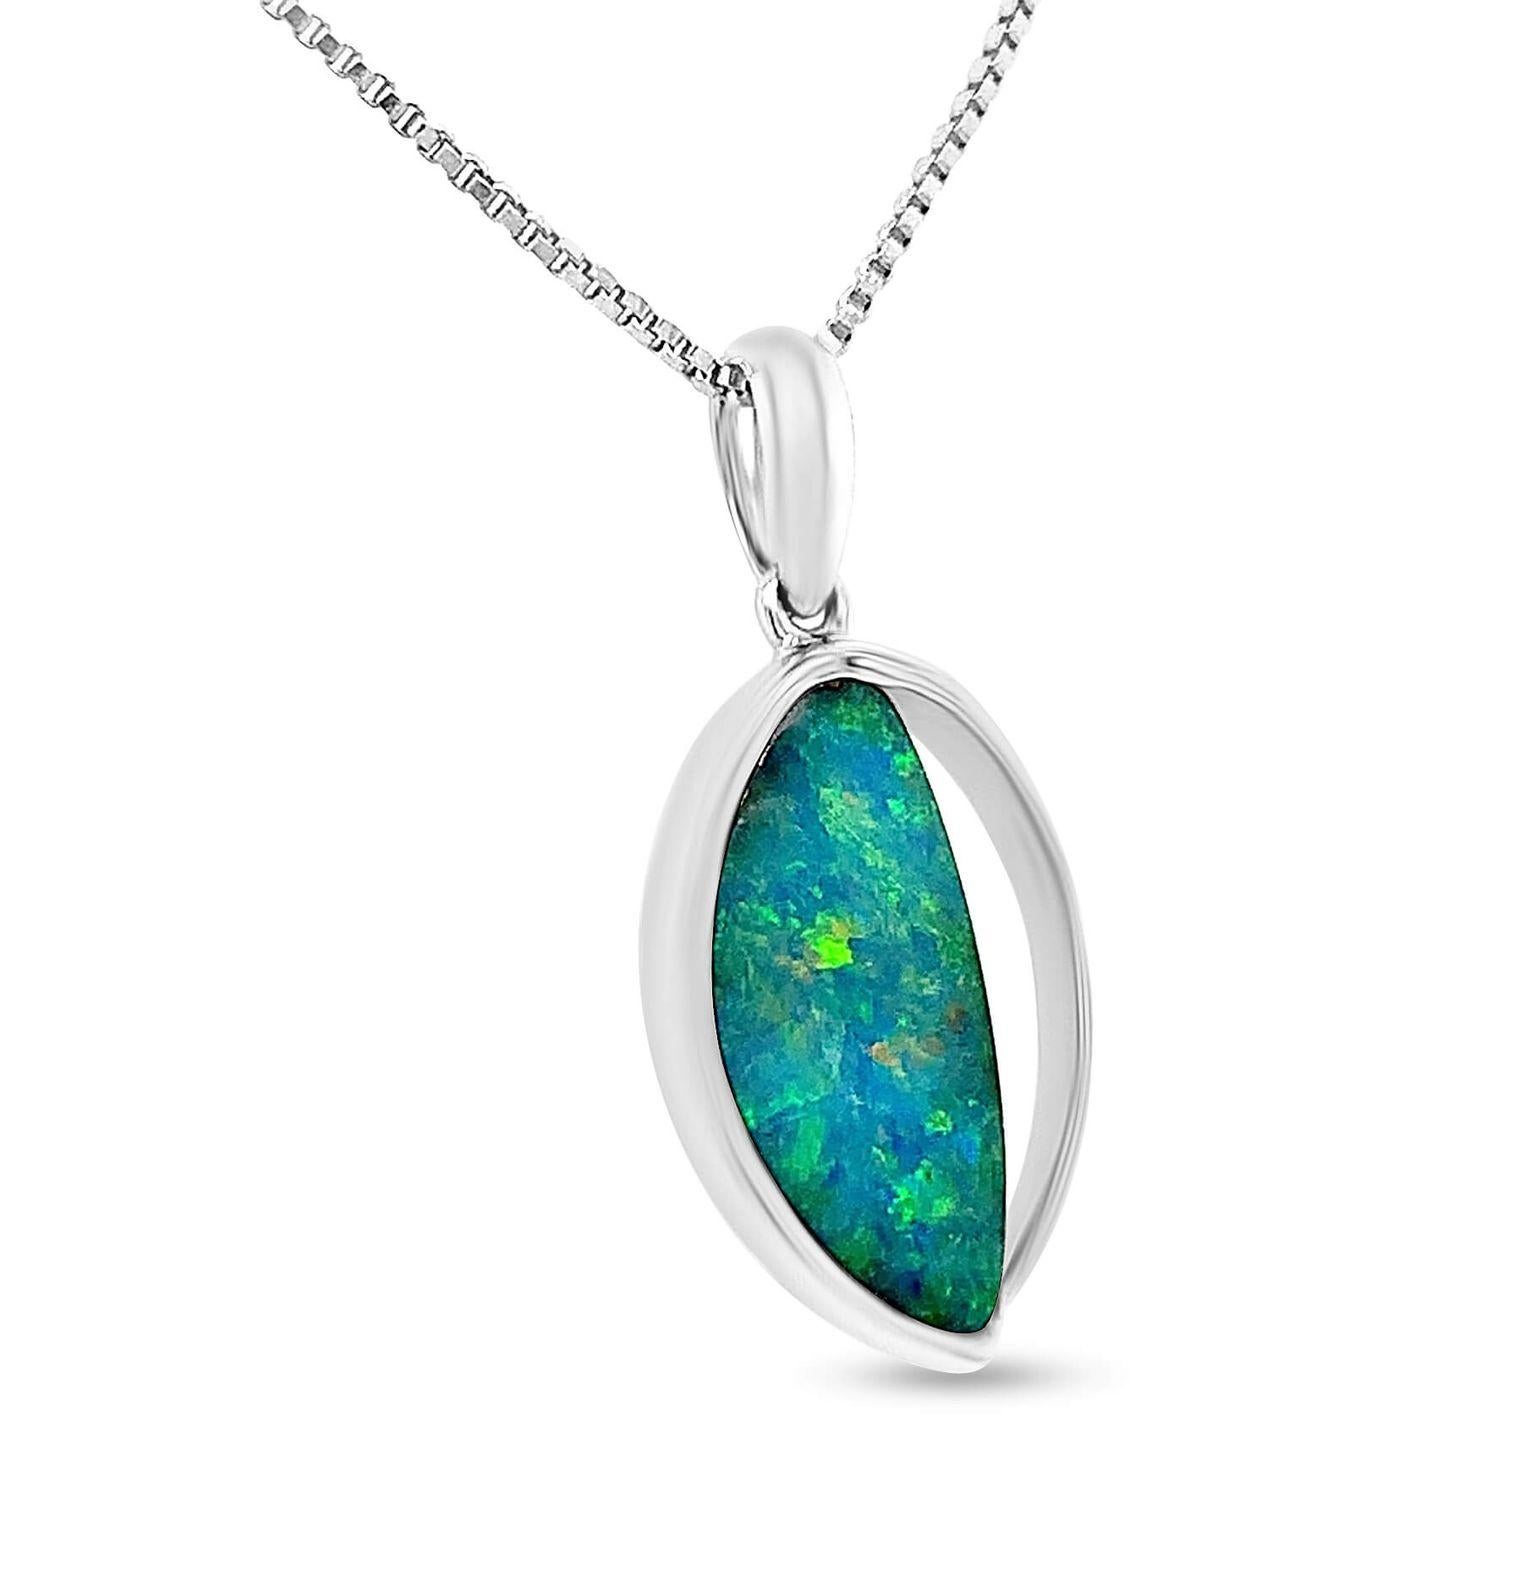 Contemporary Natural Australian 3.02ct Boulder Opal Pendant Necklace in 18K White Gold